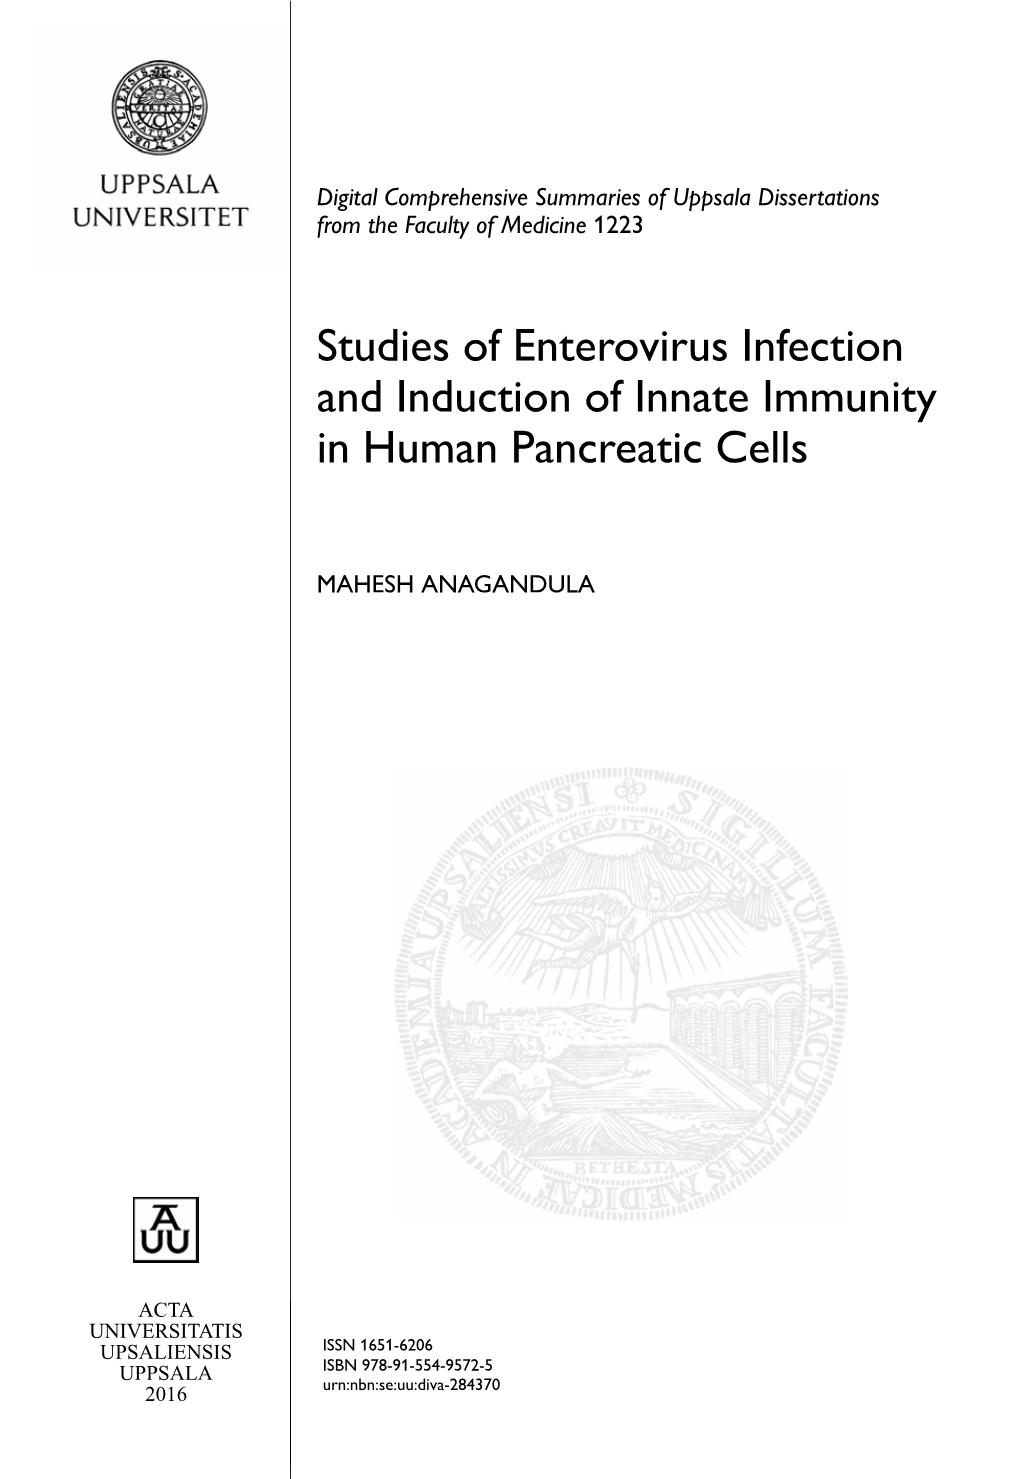 Studies of Enterovirus Infection and Induction of Innate Immunity in Human Pancreatic Cells